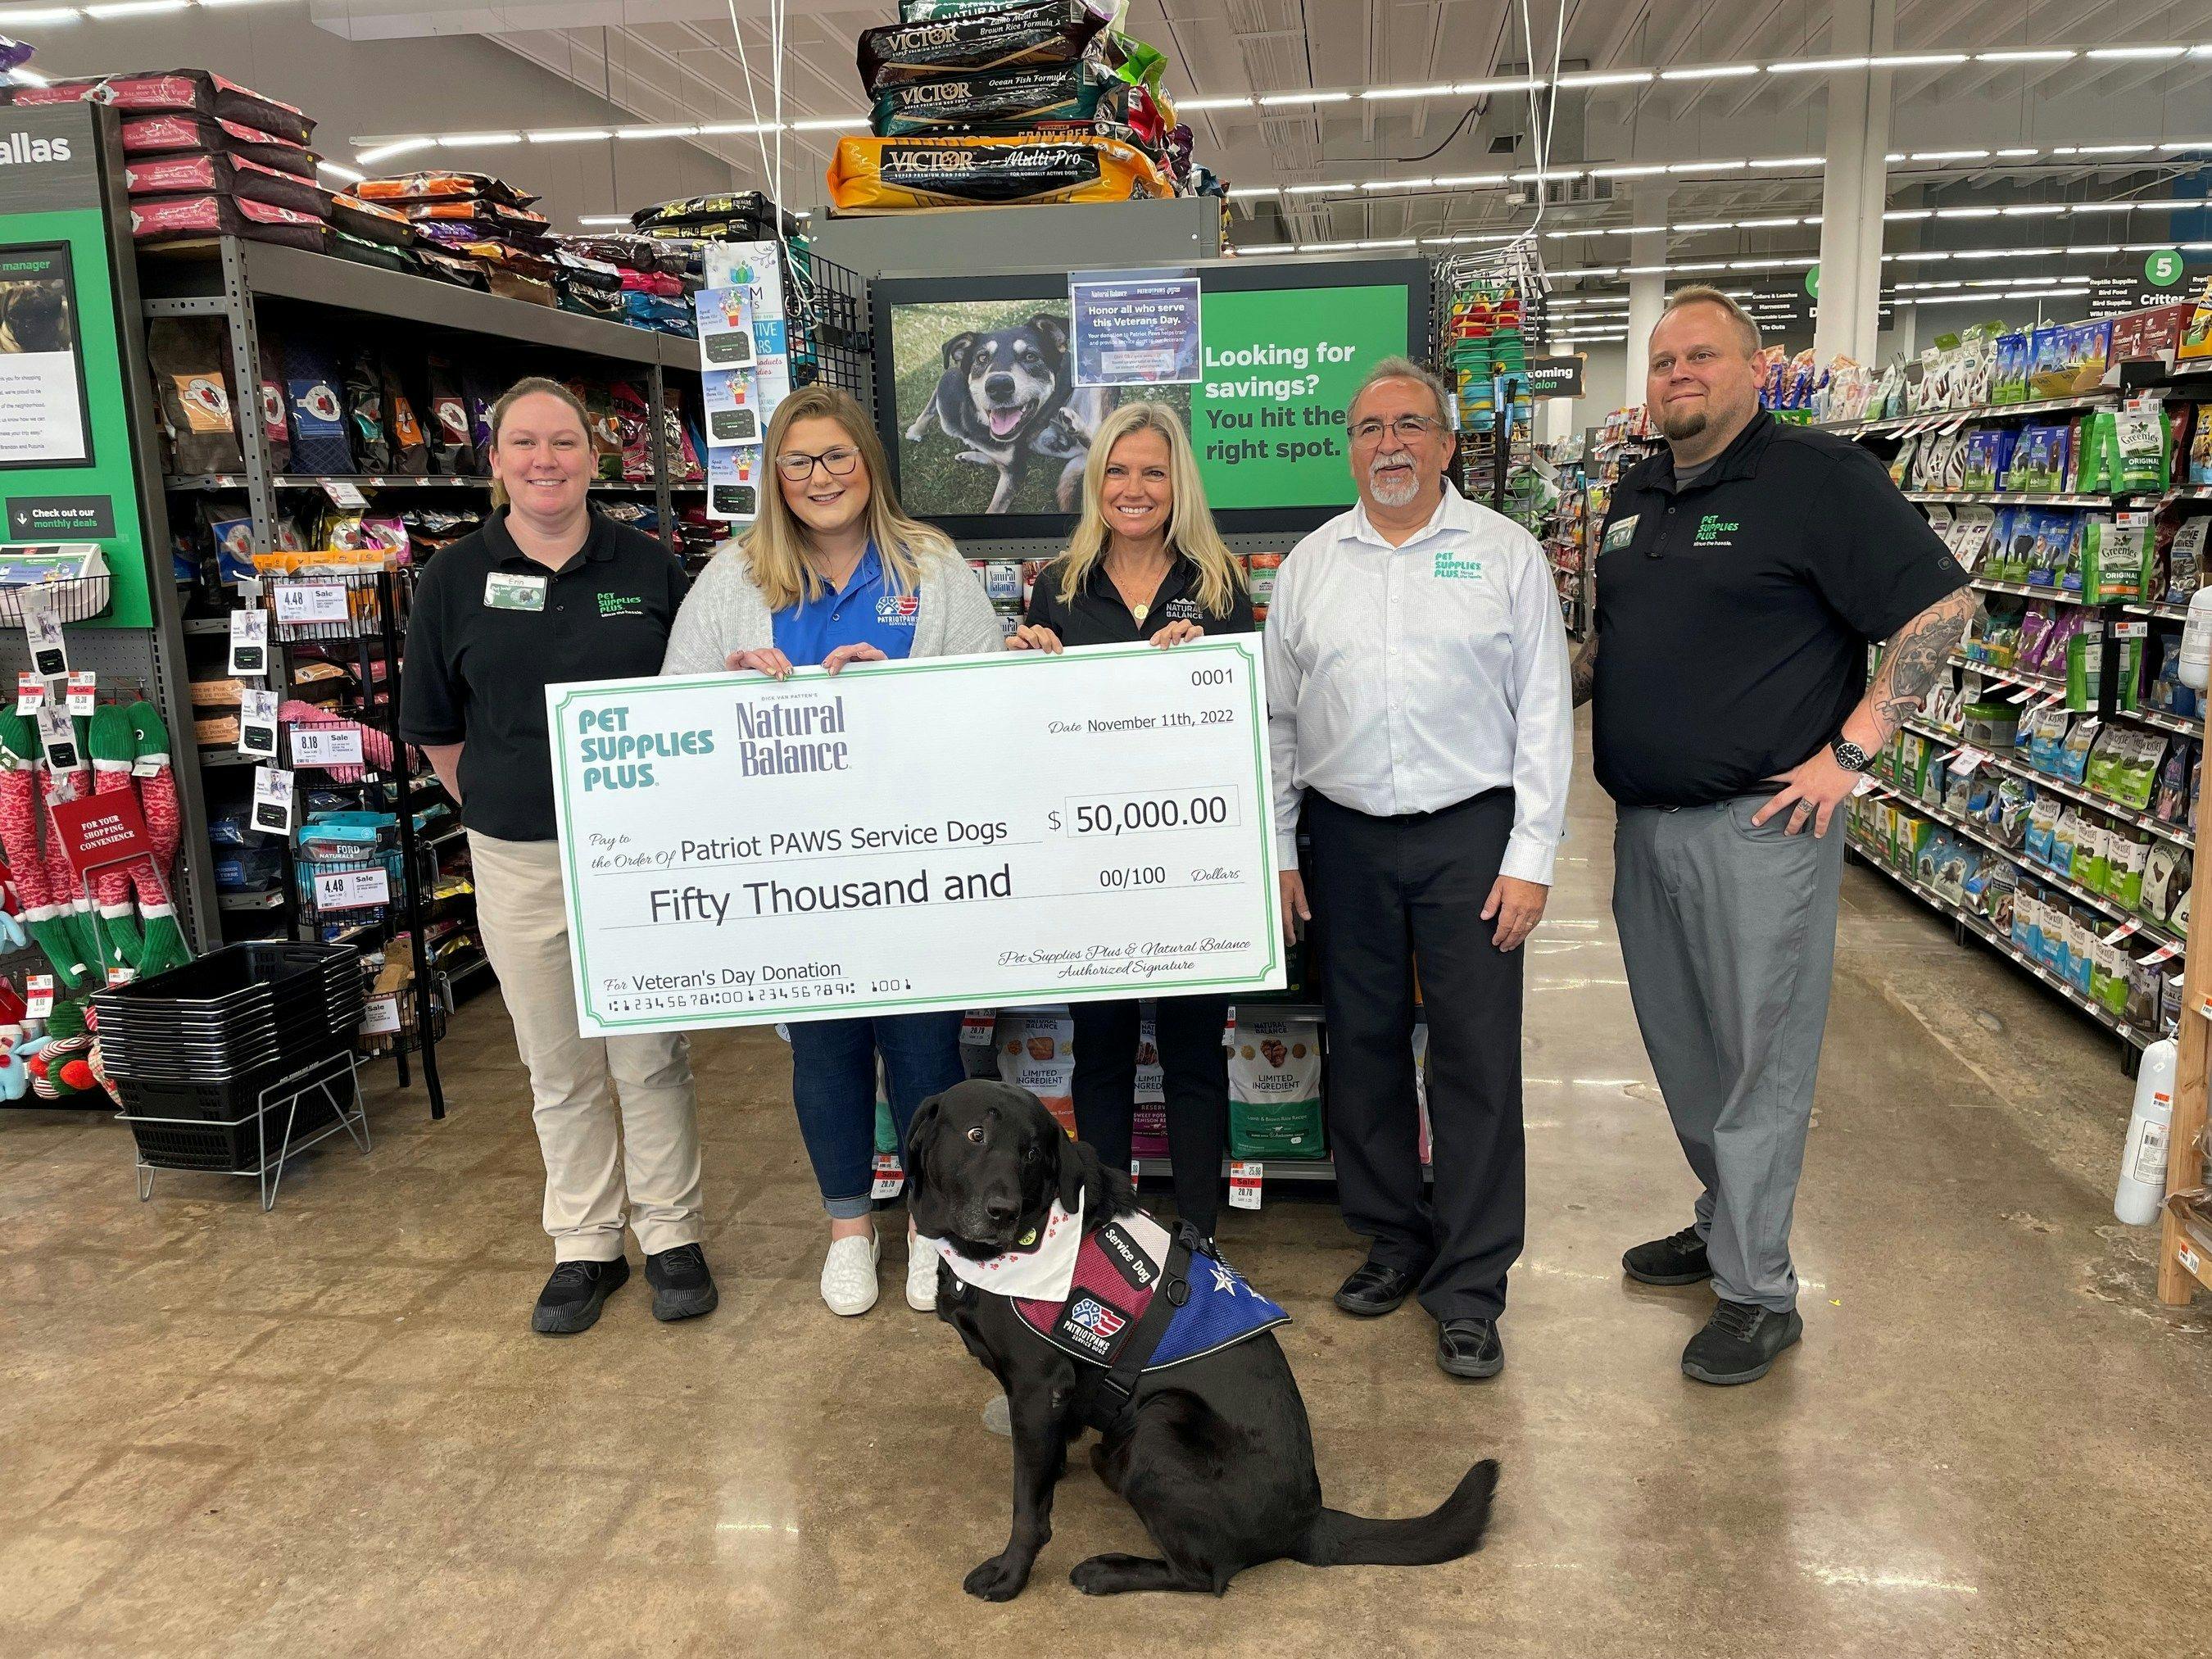 Pet Supplies Plus and Natural Balance presenting the $50,000 donation to Patriot PAWS  (Image courtesy of Pet Supplies Plus) 